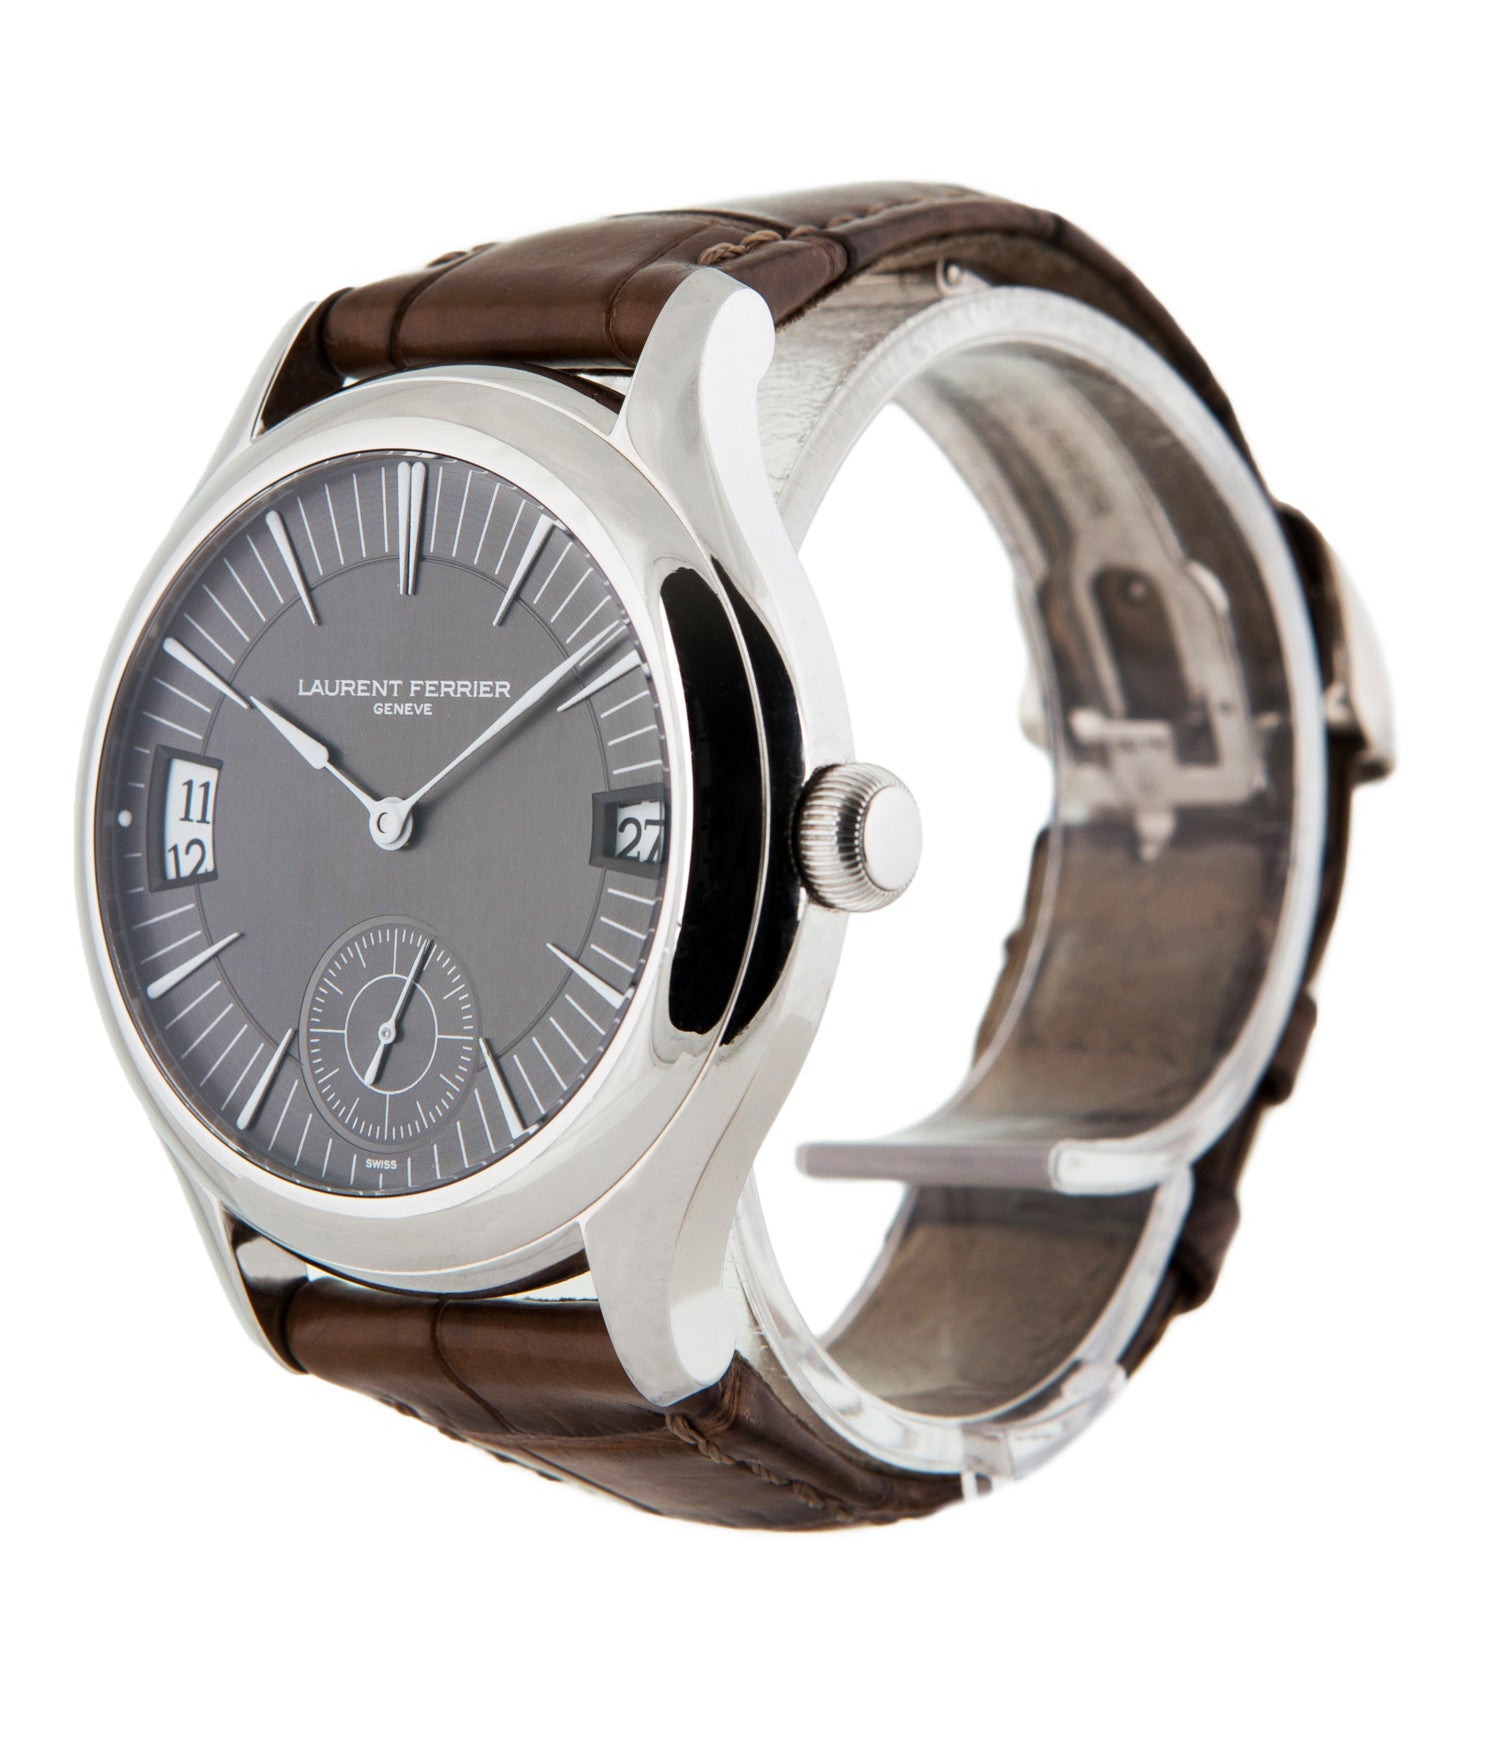 prototype Laurent Ferrier Galet Traveller LCF 007-AC unique stainless steel automatic Cal. LF 230.01 authentic pre-owned rare luxury dress watch from 2013 with solid silver dial and applied 18K white gold indexes dial side shot